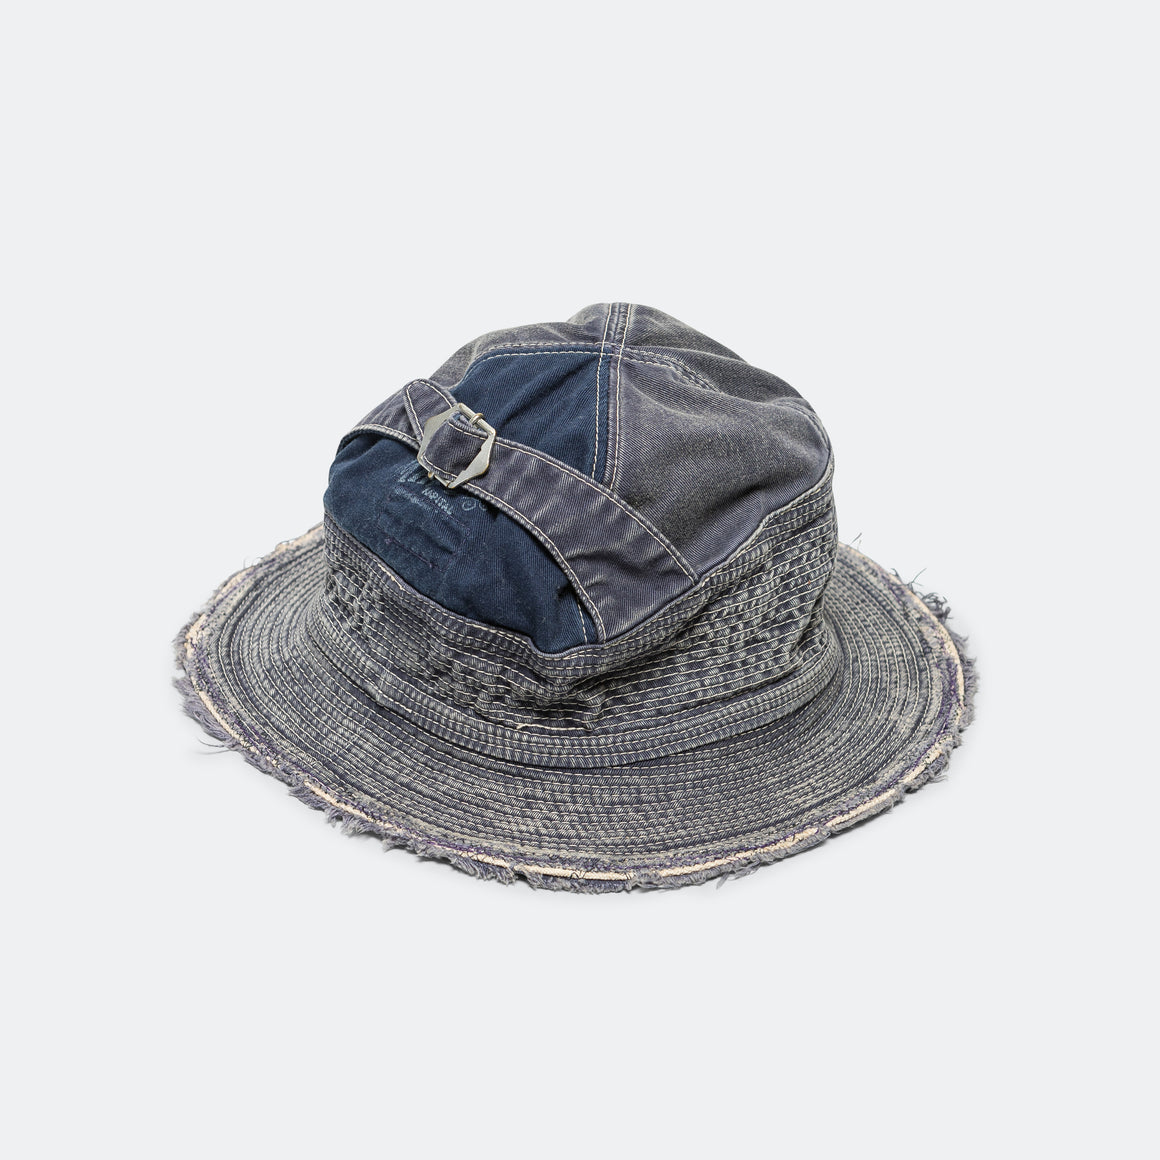 11.5oz THE OLD MAN AND THE SEA Hat (SOFT CRASH REMAKE) - Navy